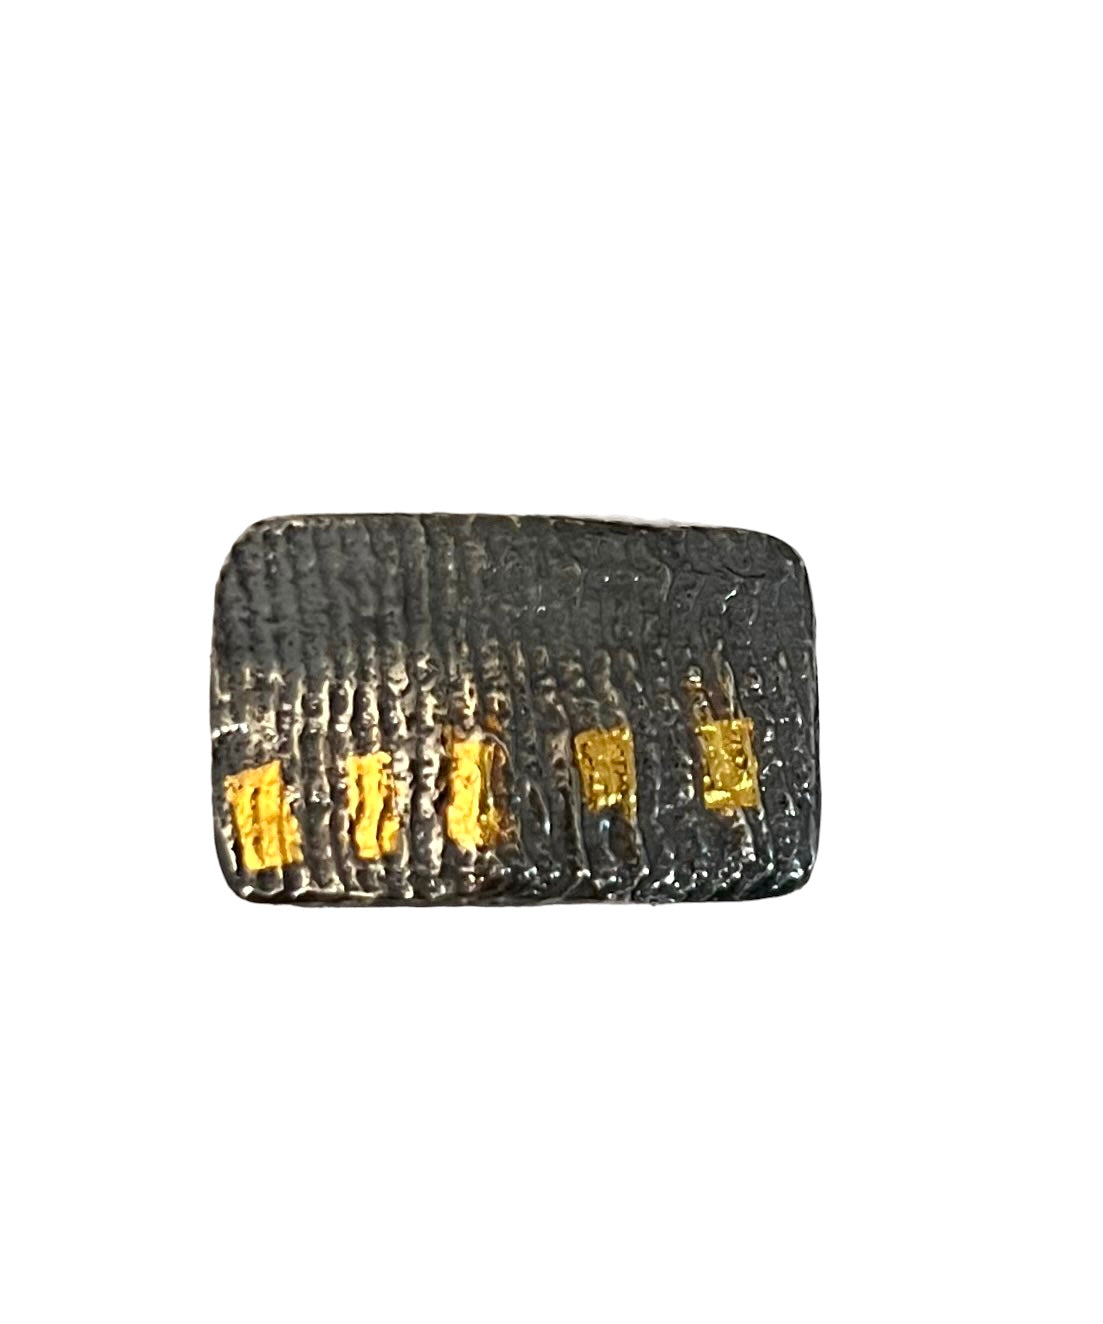 A size 7 ring with a rectangle of cuttlefish cast oxidized sterling silver and 5/24 karat gold keum boo accents